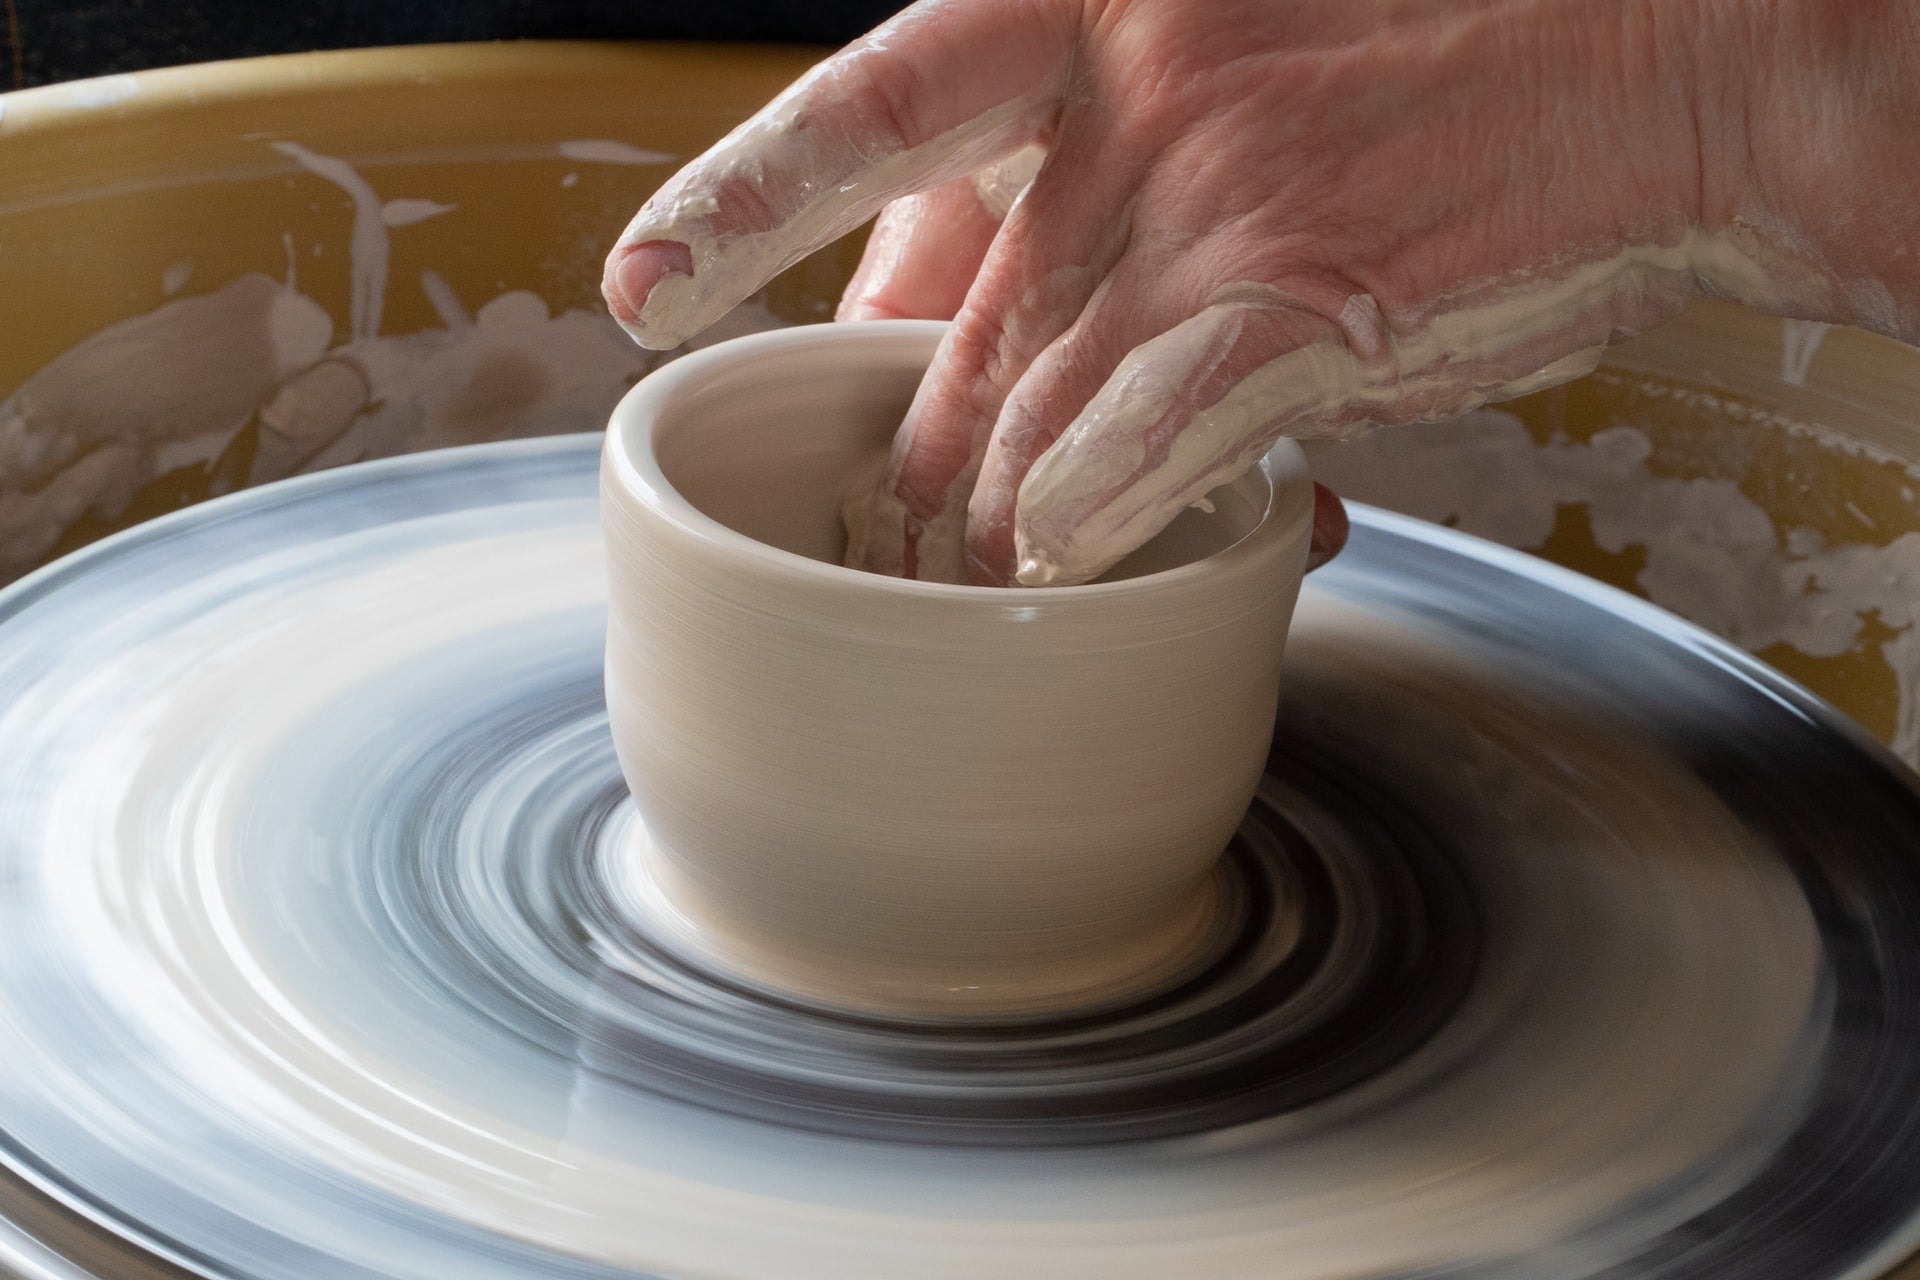 The hands of a ceramicist pinching an object on a wheel.